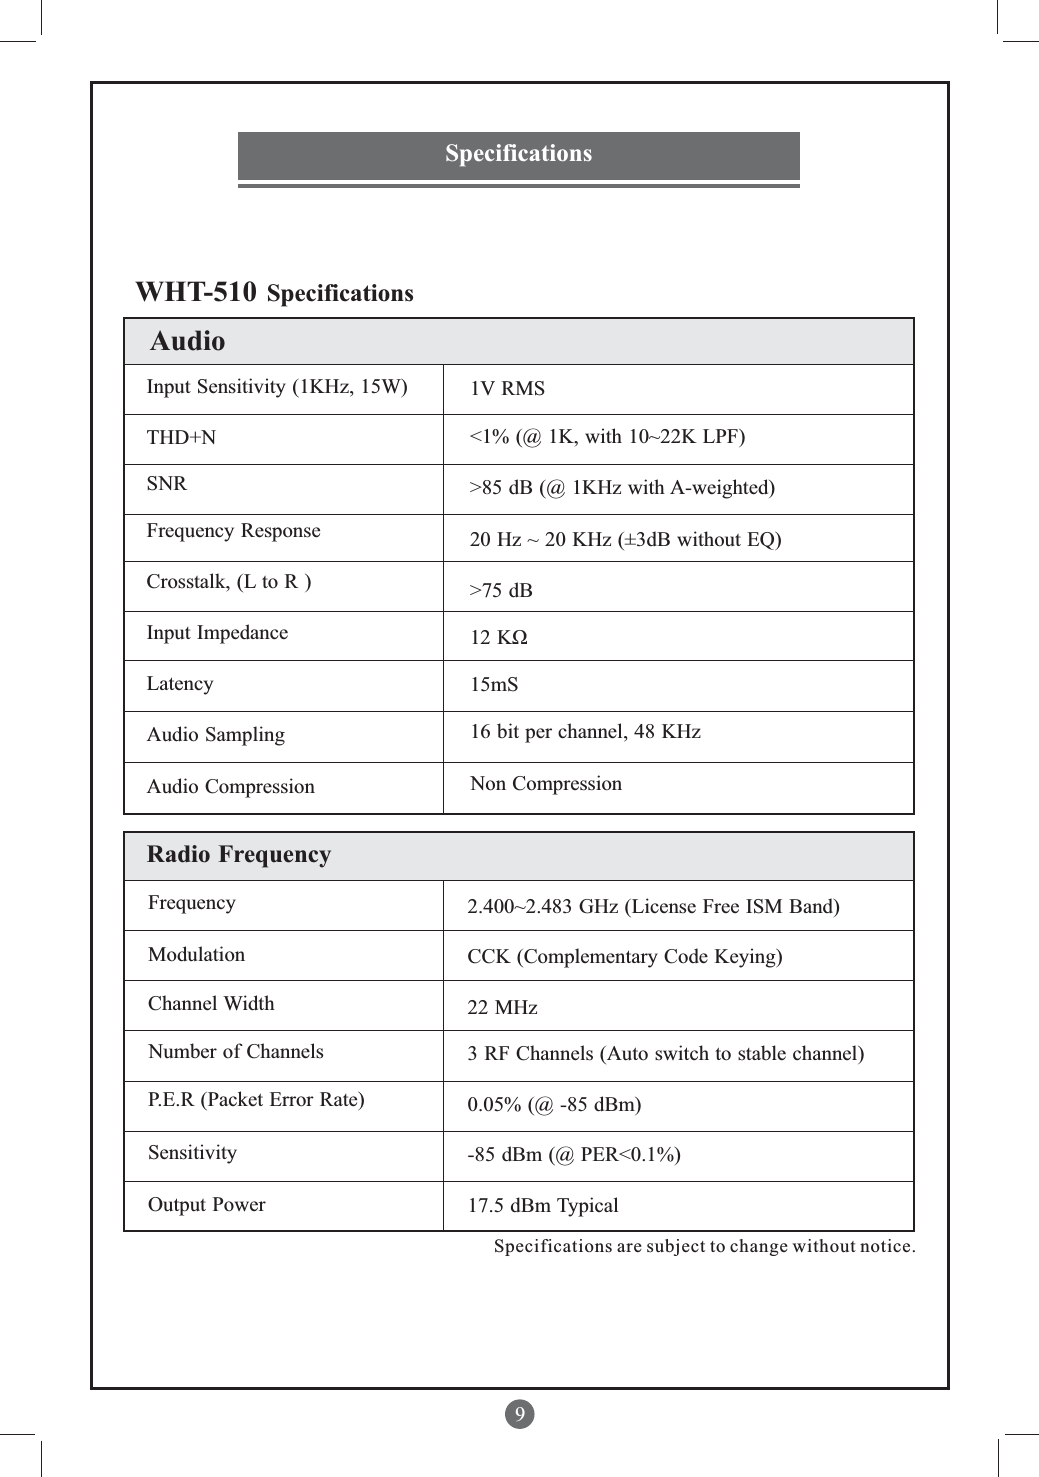 89SpecificationsSpecifications are subject to change without notice.WHT-510 SpecificationsAudioRadio FrequencyInput Sensitivity (1KHz, 15W)  1V RMSTHD+N  &lt;1% (@ 1K, with 10~22K LPF)SNR  &gt;85 dB (@ 1KHz with A-weighted)Frequency Response  20 Hz ~ 20 KHz (±3dB without EQ)Crosstalk, (L to R )  &gt;75 dBInput Impedance  12 KΩLatency  15mSAudio Sampling  16 bit per channel, 48 KHzAudio Compression  Non CompressionFrequency  2.400~2.483 GHz (License Free ISM Band)Modulation  CCK (Complementary Code Keying)Channel Width  22 MHzNumber of Channels  3 RF Channels (Auto switch to stable channel)P.E.R (Packet Error Rate)  0.05% (@ -85 dBm)Sensitivity  -85 dBm (@ PER&lt;0.1%)Output Power  17.5 dBm Typical